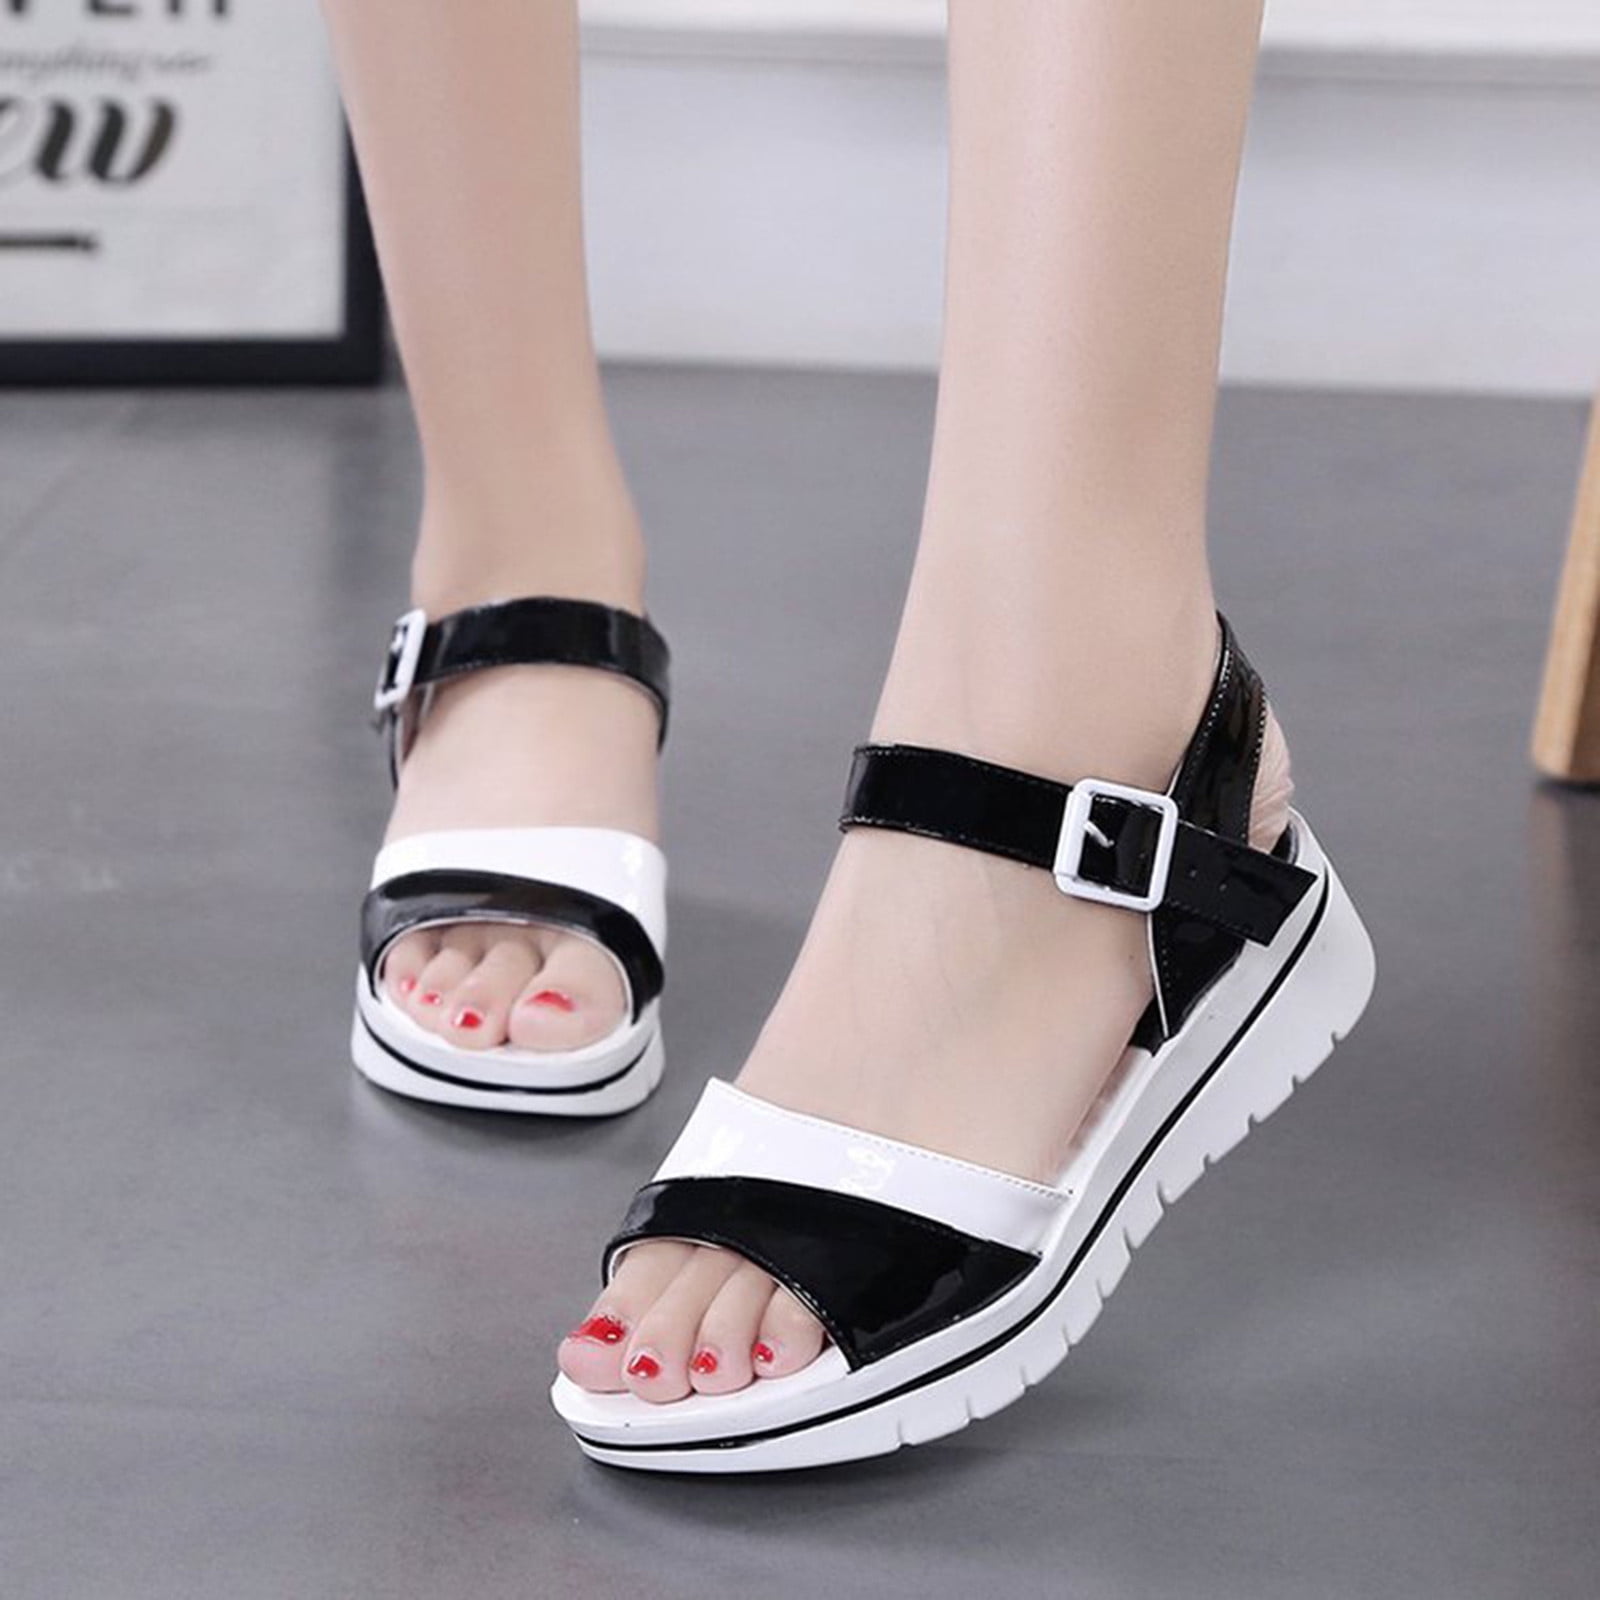 Sandals for Girls Images • anjy (@yuuuy) on ShareChat